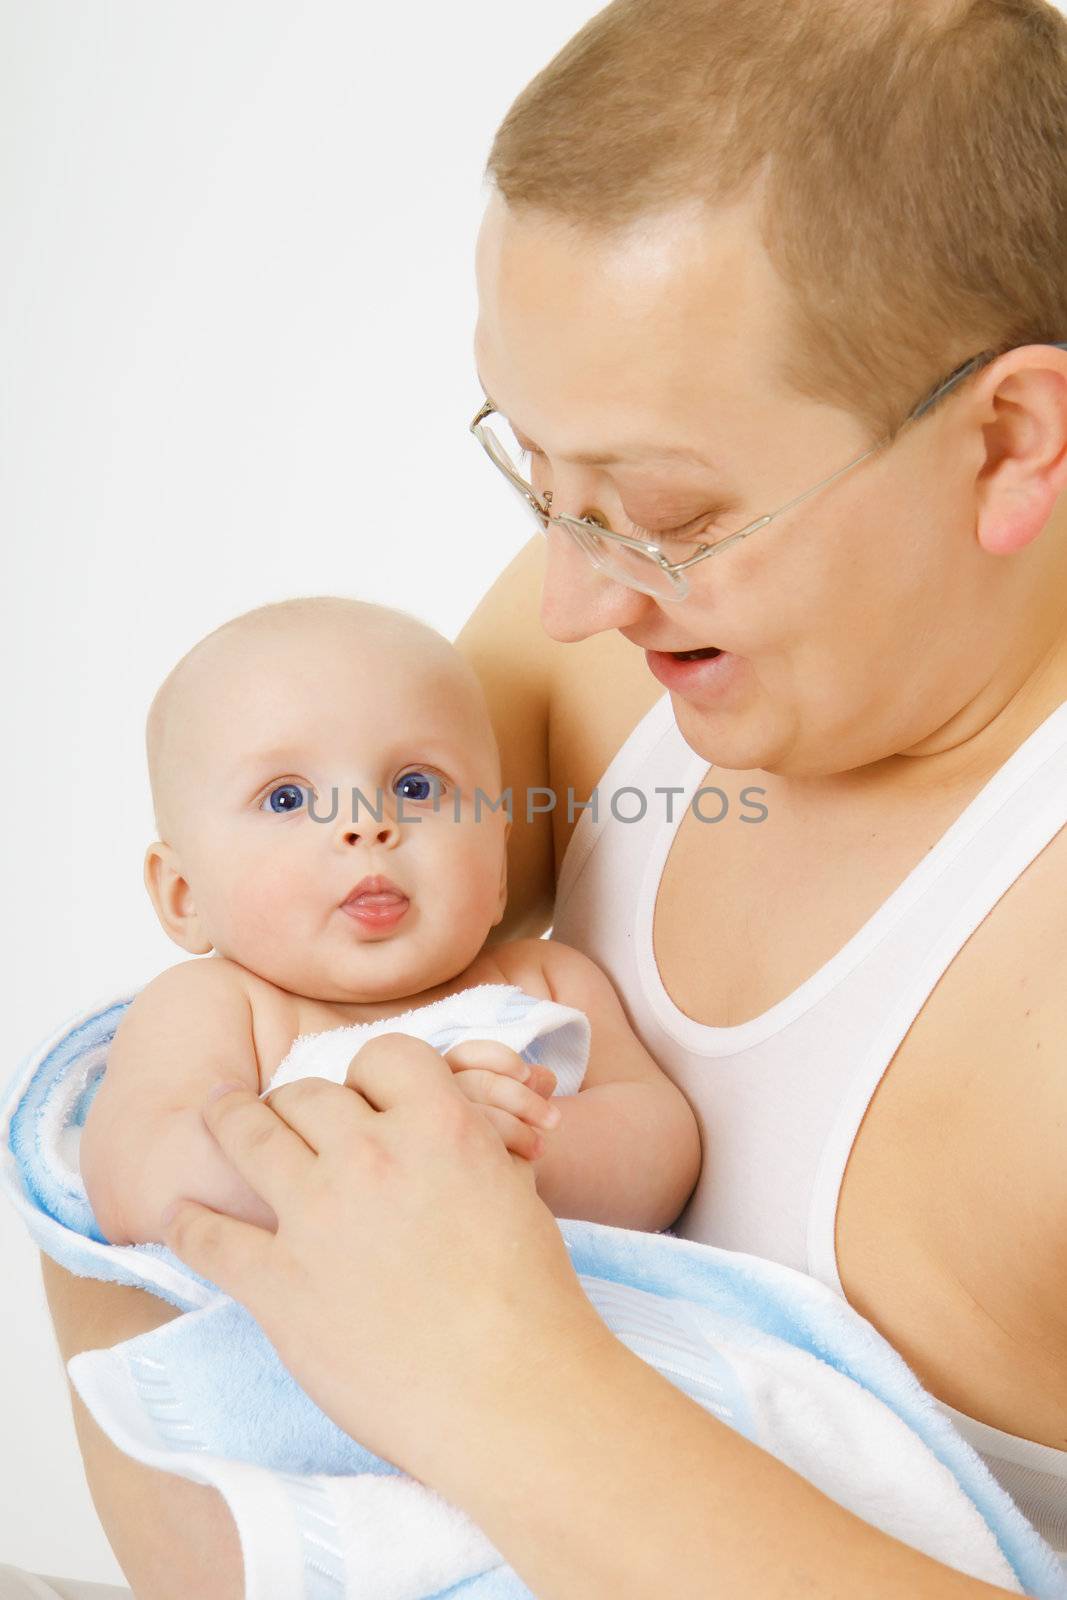 father is holding the baby. Studio photography
